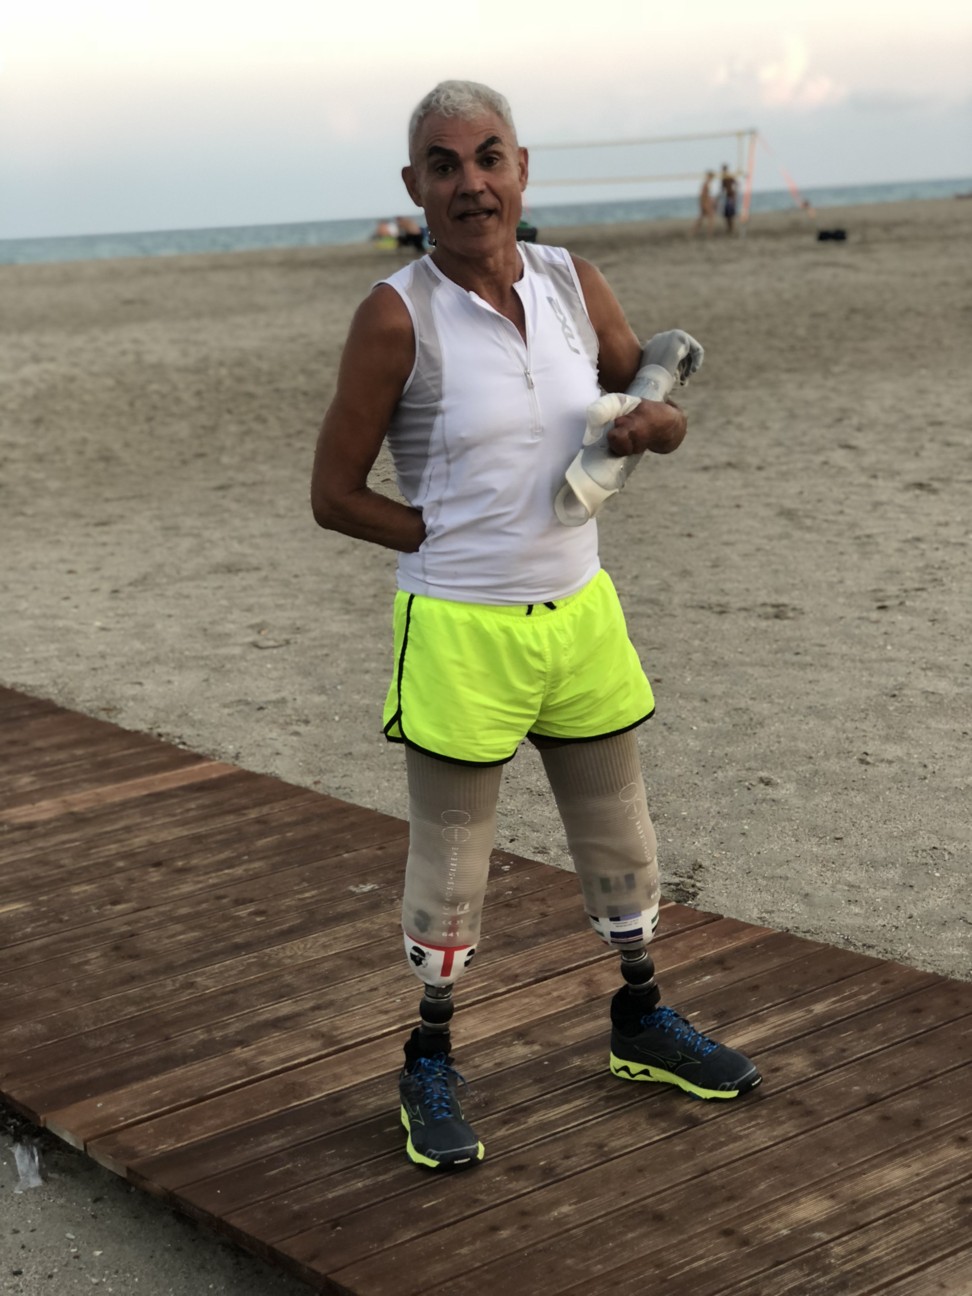 Roberto Zanda on his prosthetic legs, bionic arm in hand, in his beloved Sardinia, six months after his Canadian Yukon nightmare. Photo: Lise Floris